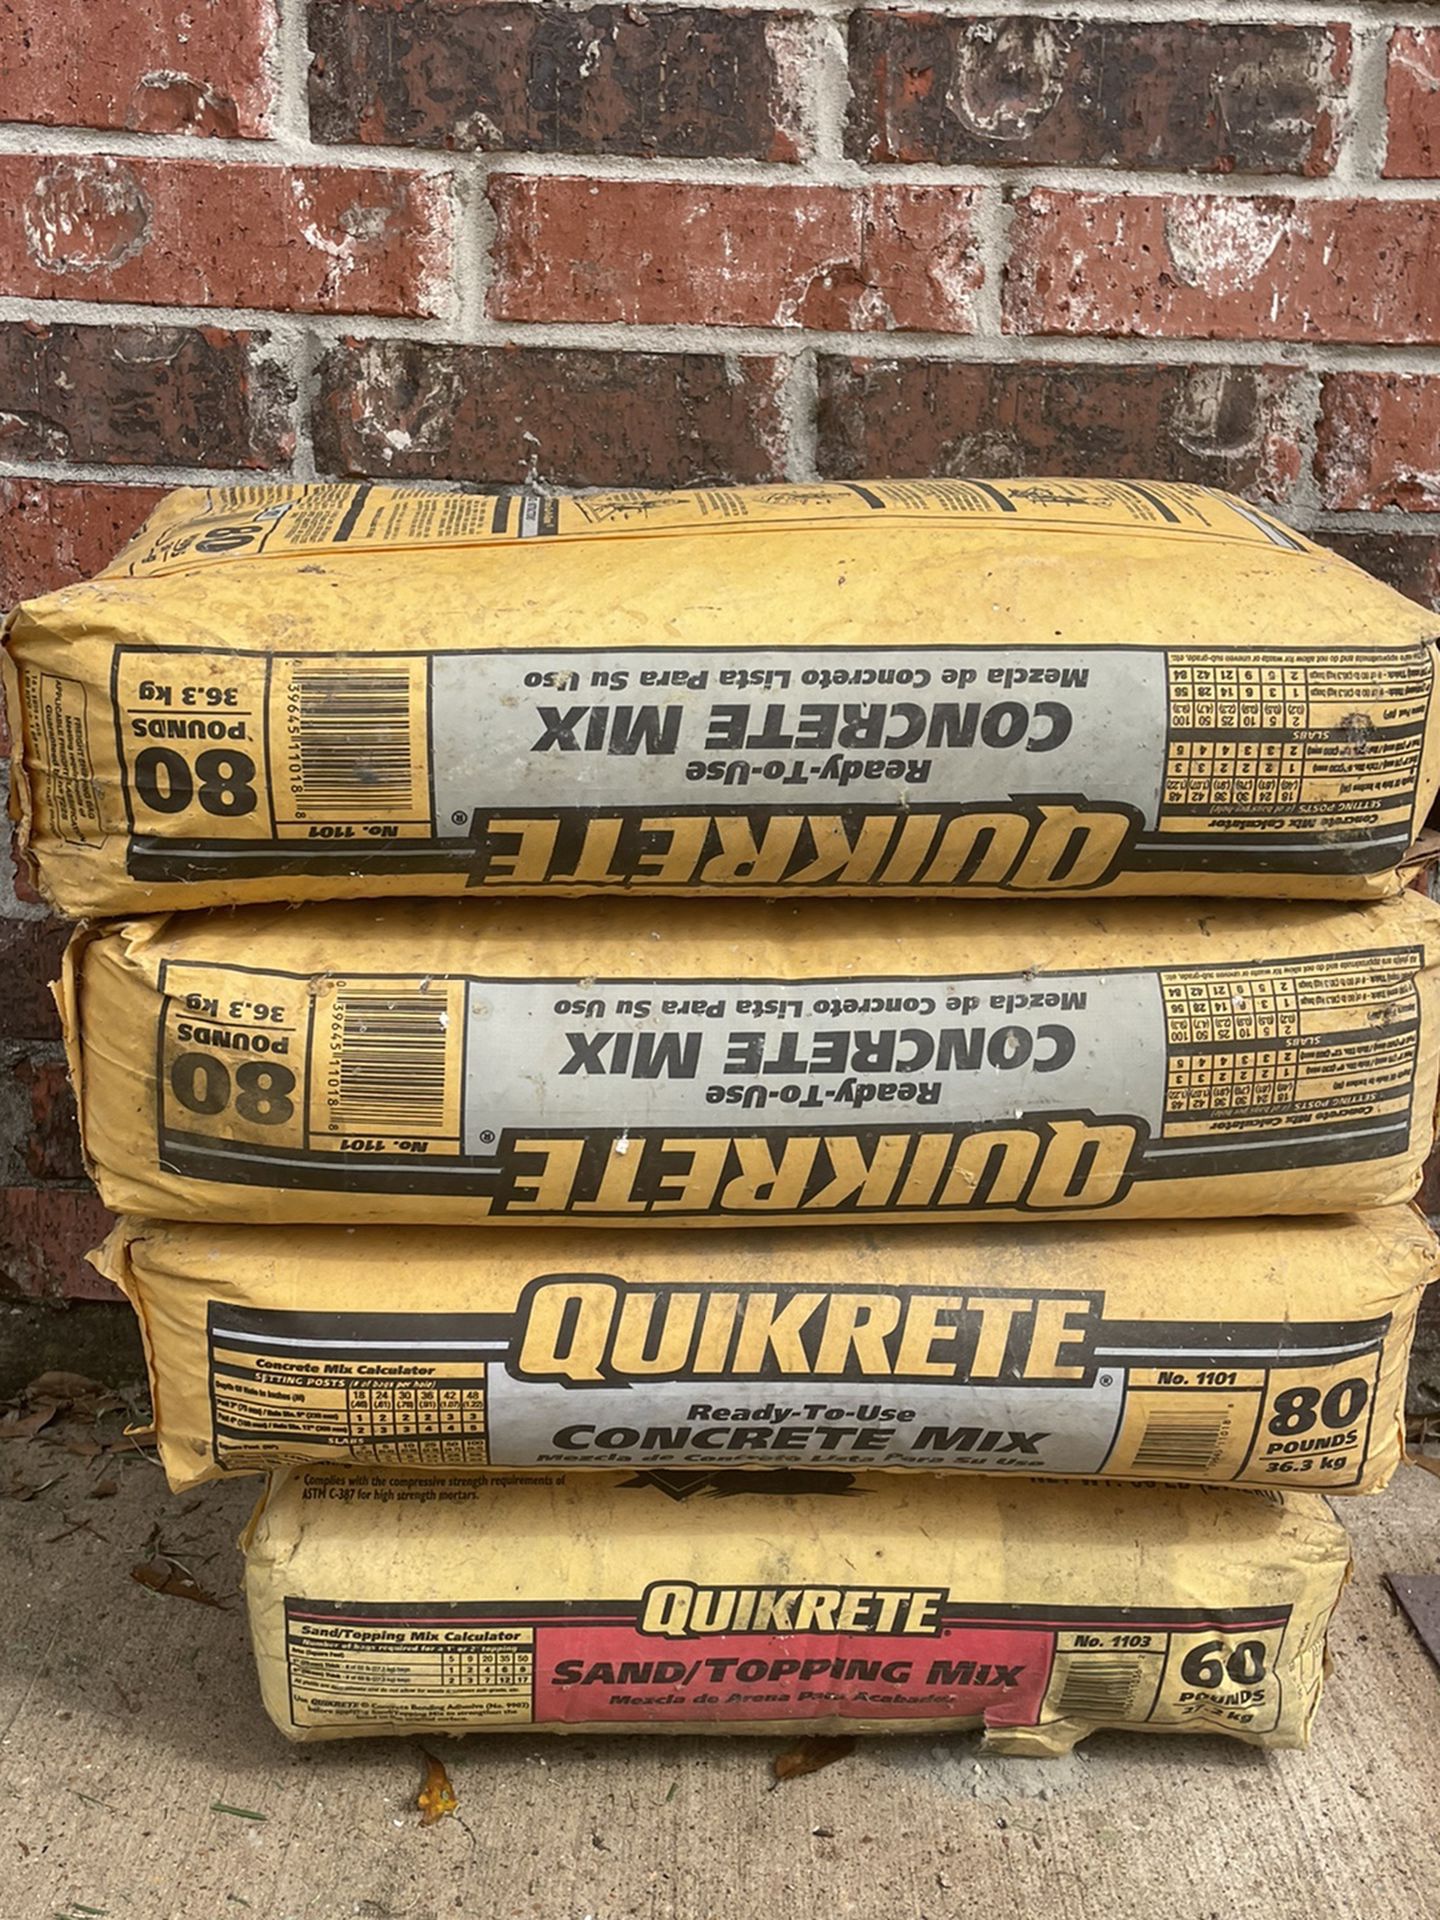 FREE - 3 Bags Of Concrete + 1 Bag Of Sand Mix